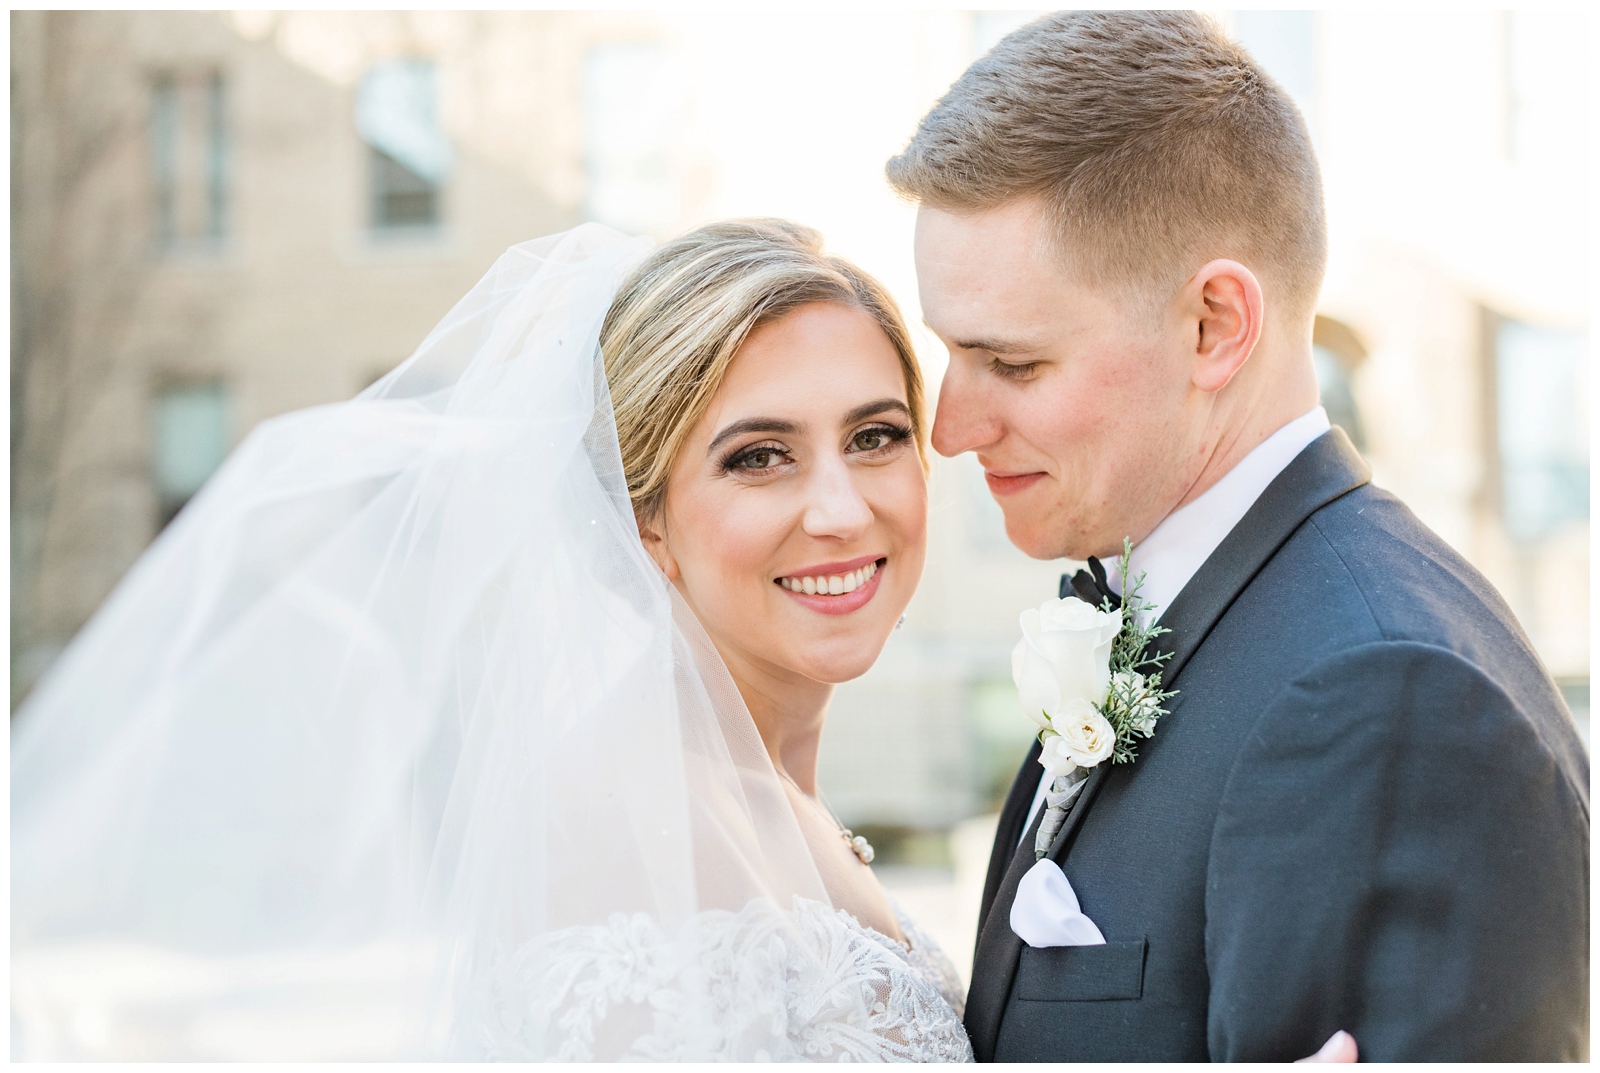 bride looks at photographer while groom looks at her during Christmas wedding portraits at St. Charles Preparatory School